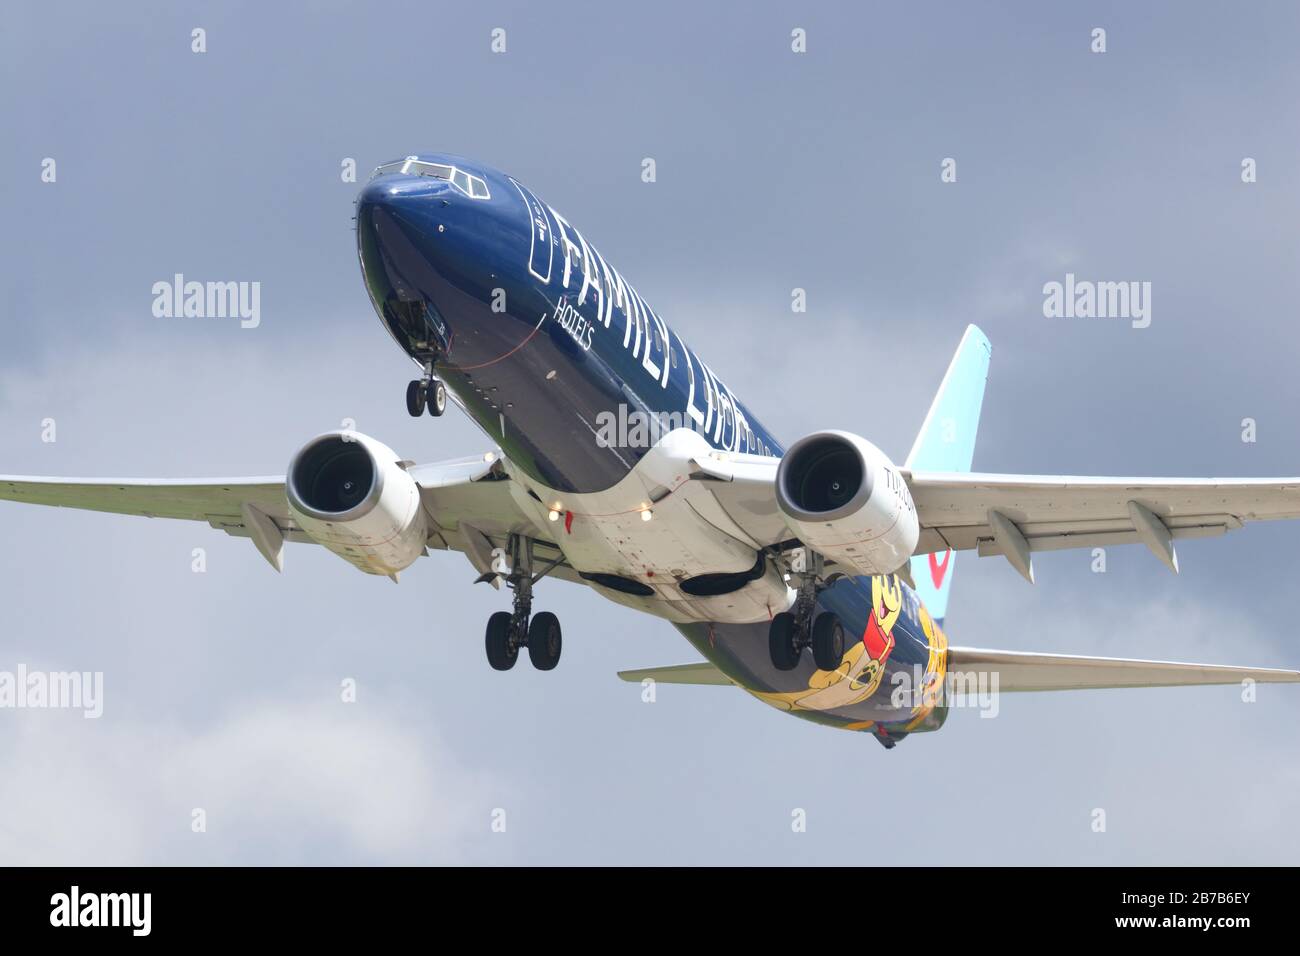 A Boeing 737 in Family Life livery operated by Thompson airways, takes off from Leeds Bradford International Airport Stock Photo